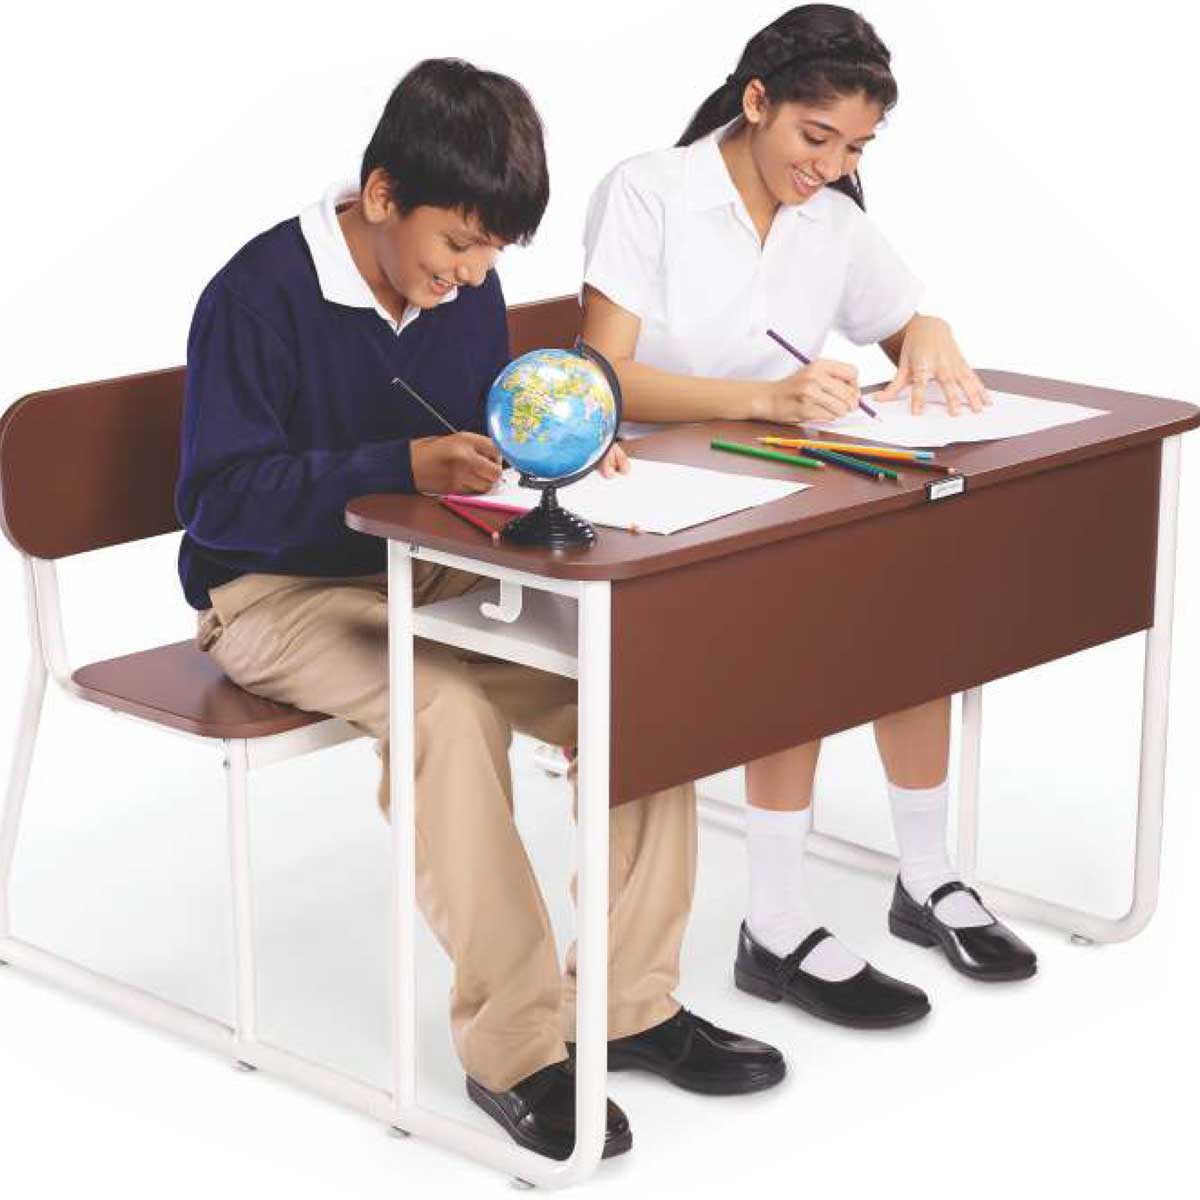 Writing Desk Manufacturers, Suppliers in Rohini Sector 22